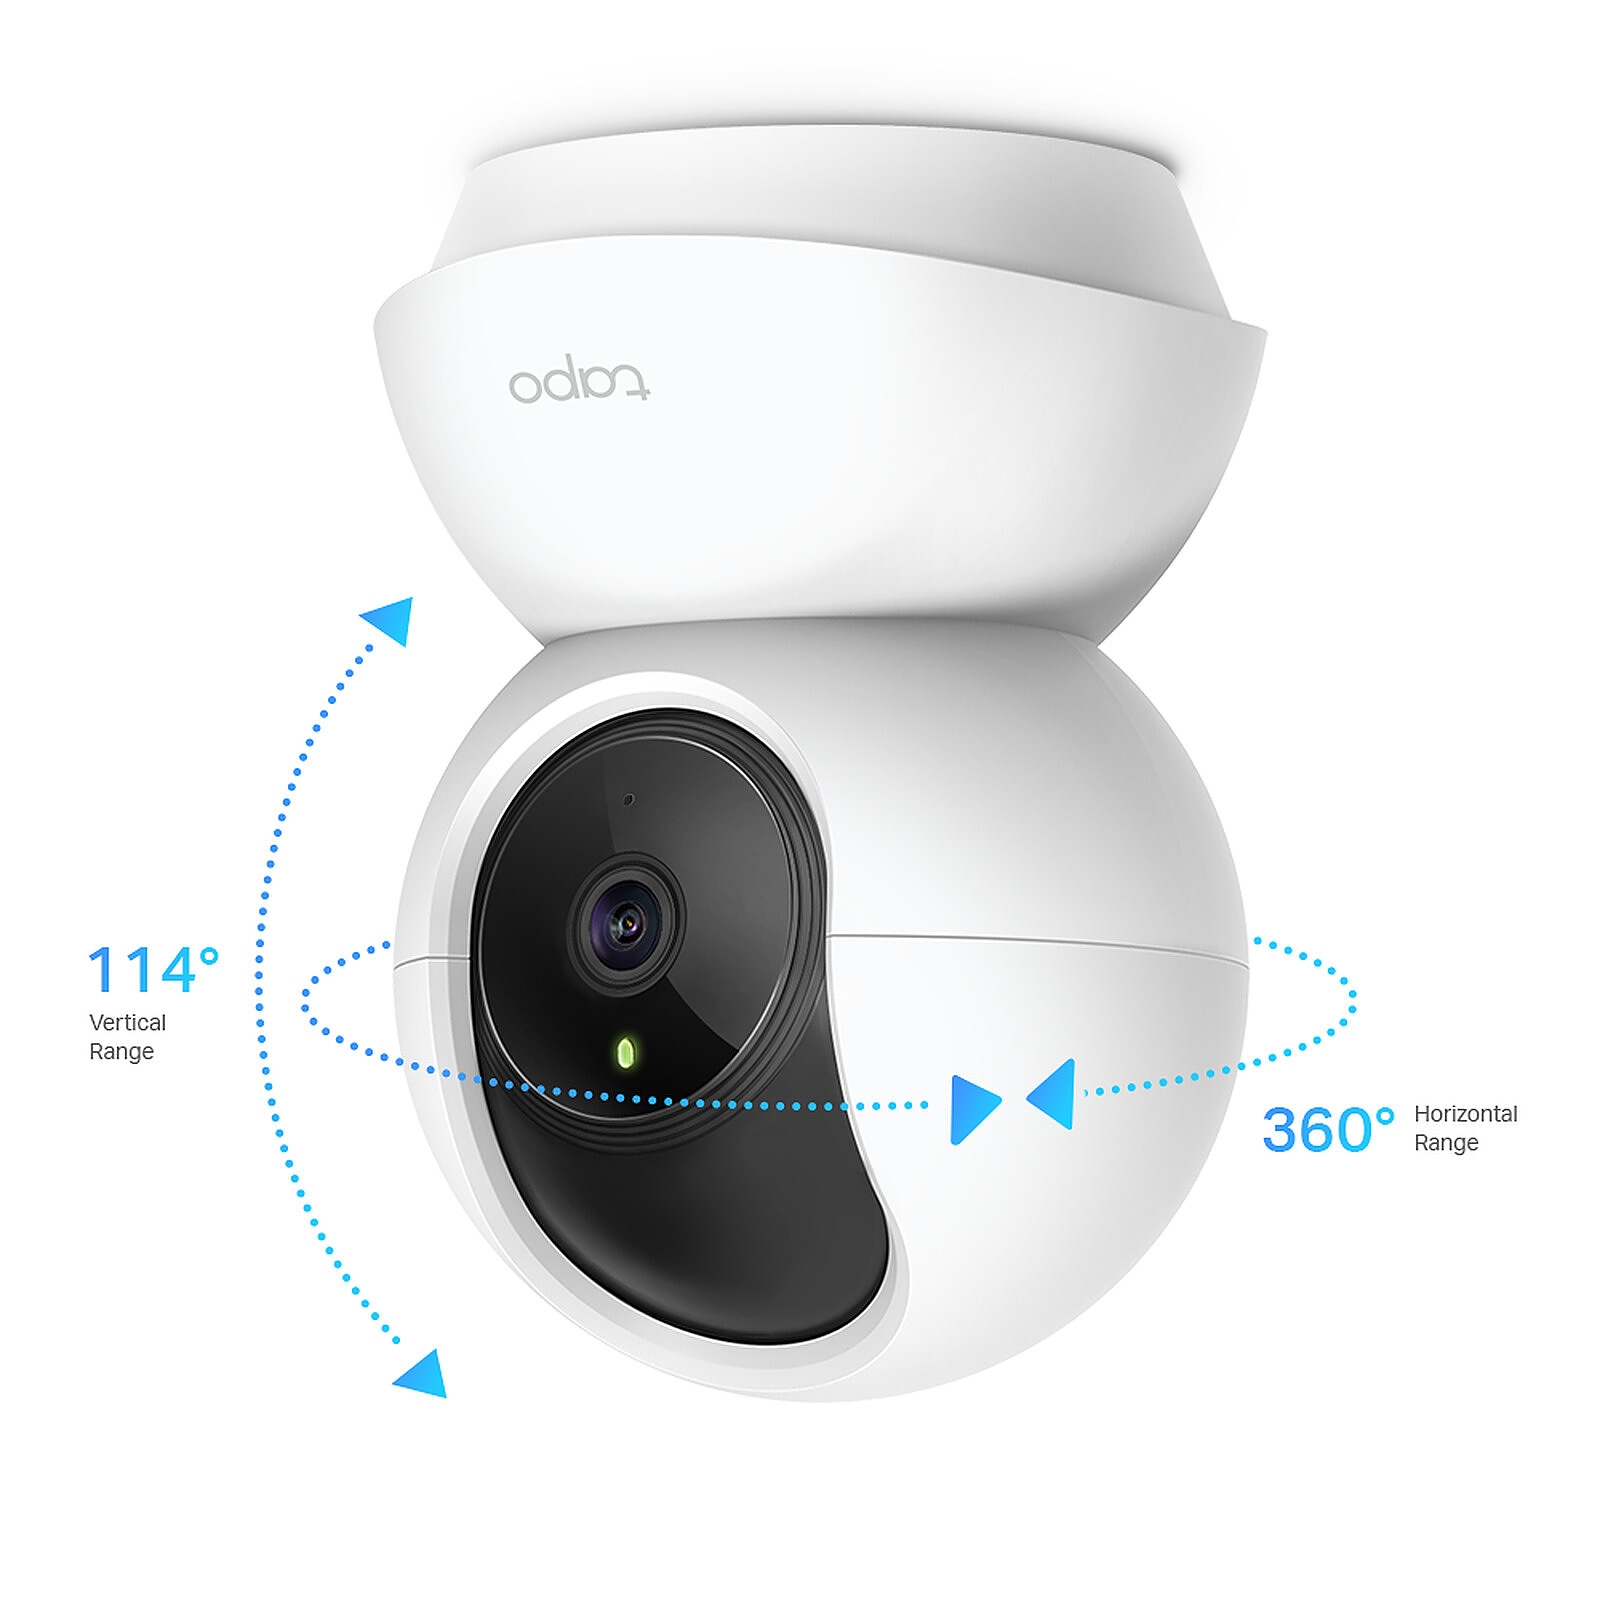 Tapo C210 Review: Best Budget IP Camera of 2021